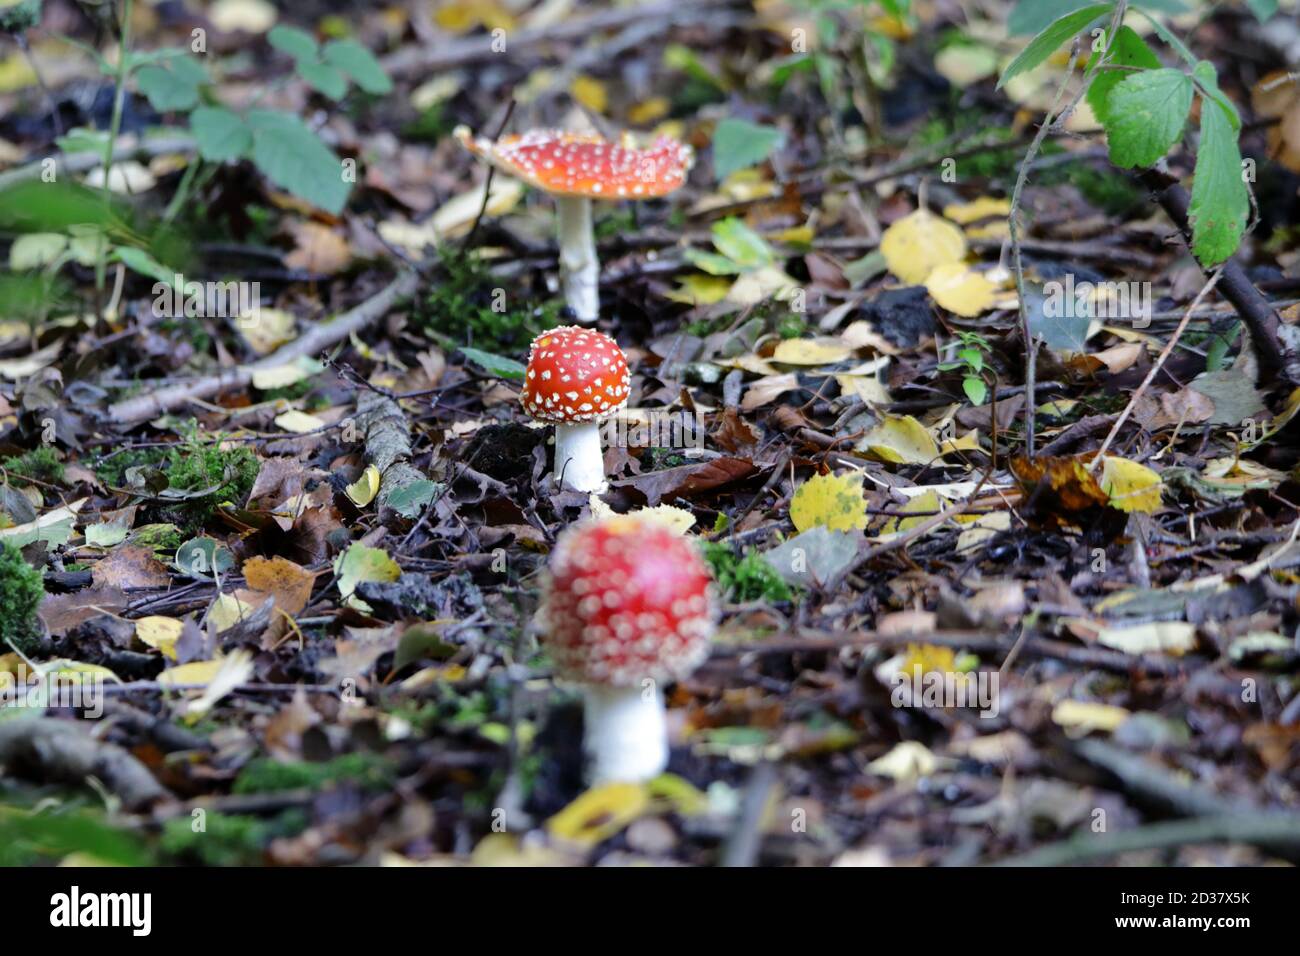 3 fly agaric or fly amanita (Amanita muscaria) in a line, the red white-spotted mushroom is arguably the most iconic toadstool species Stock Photo